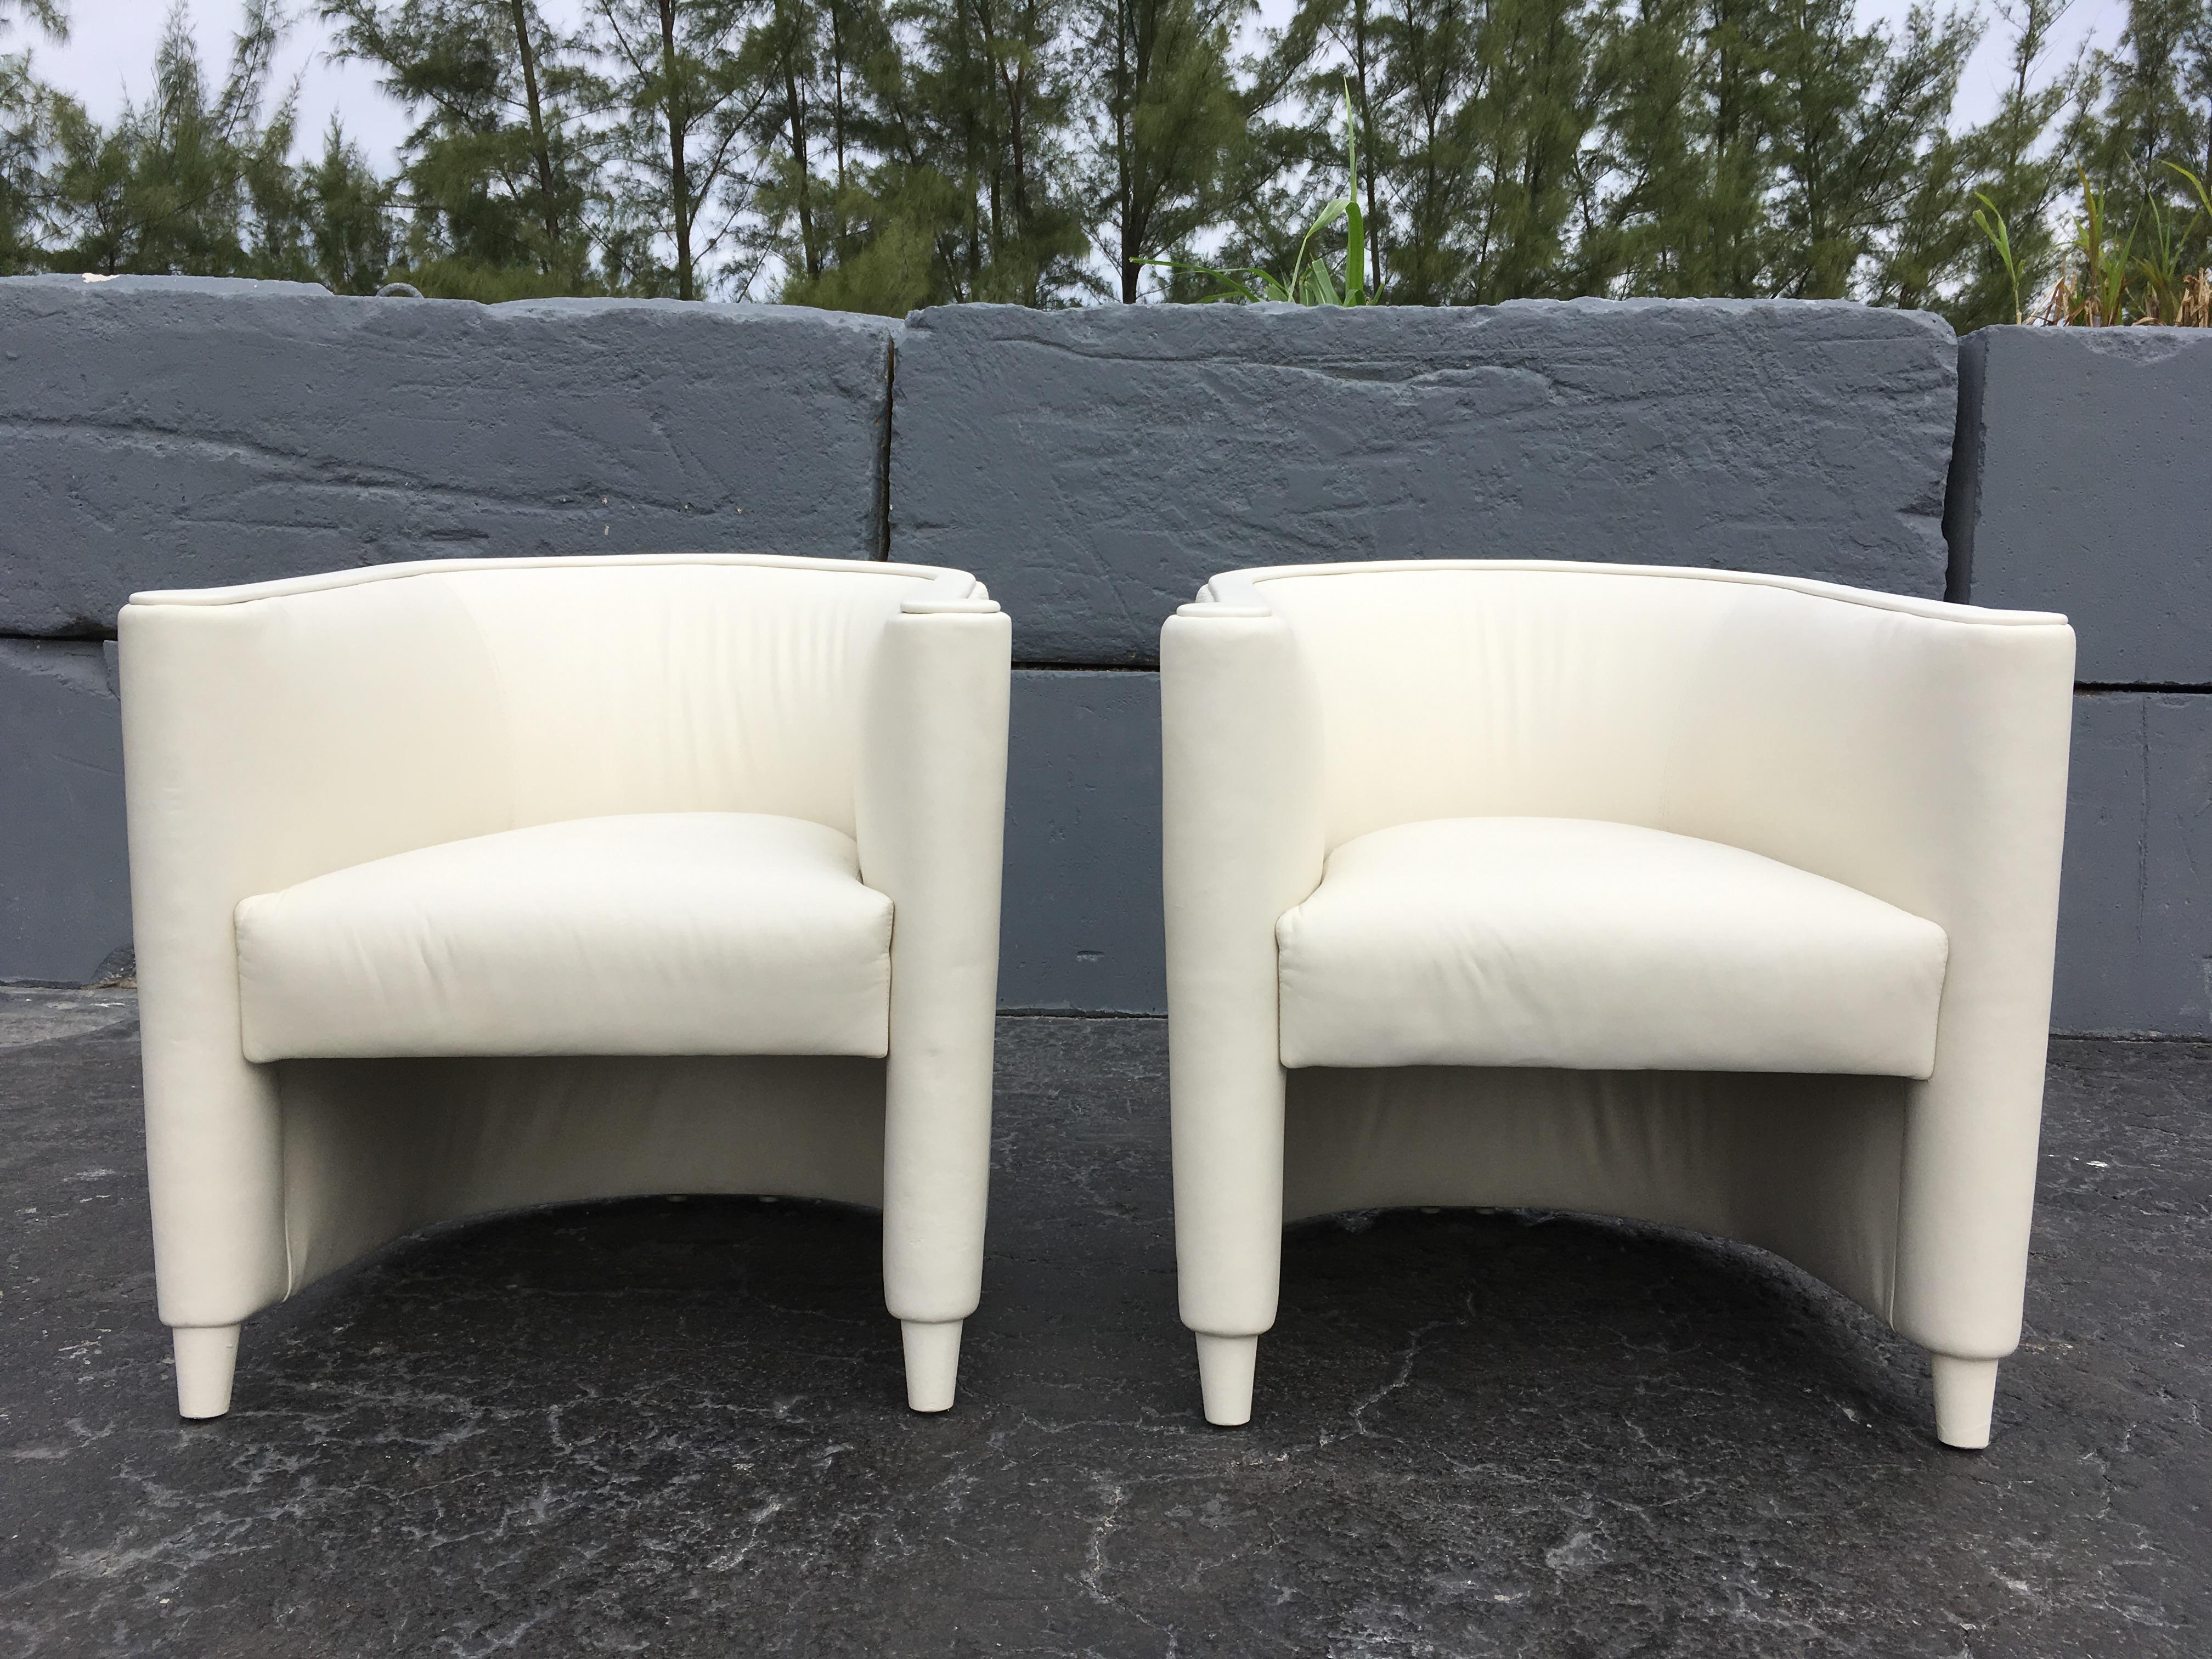 Pair of Leather Lounge Chairs, Art Deco Style, Cream Color 8